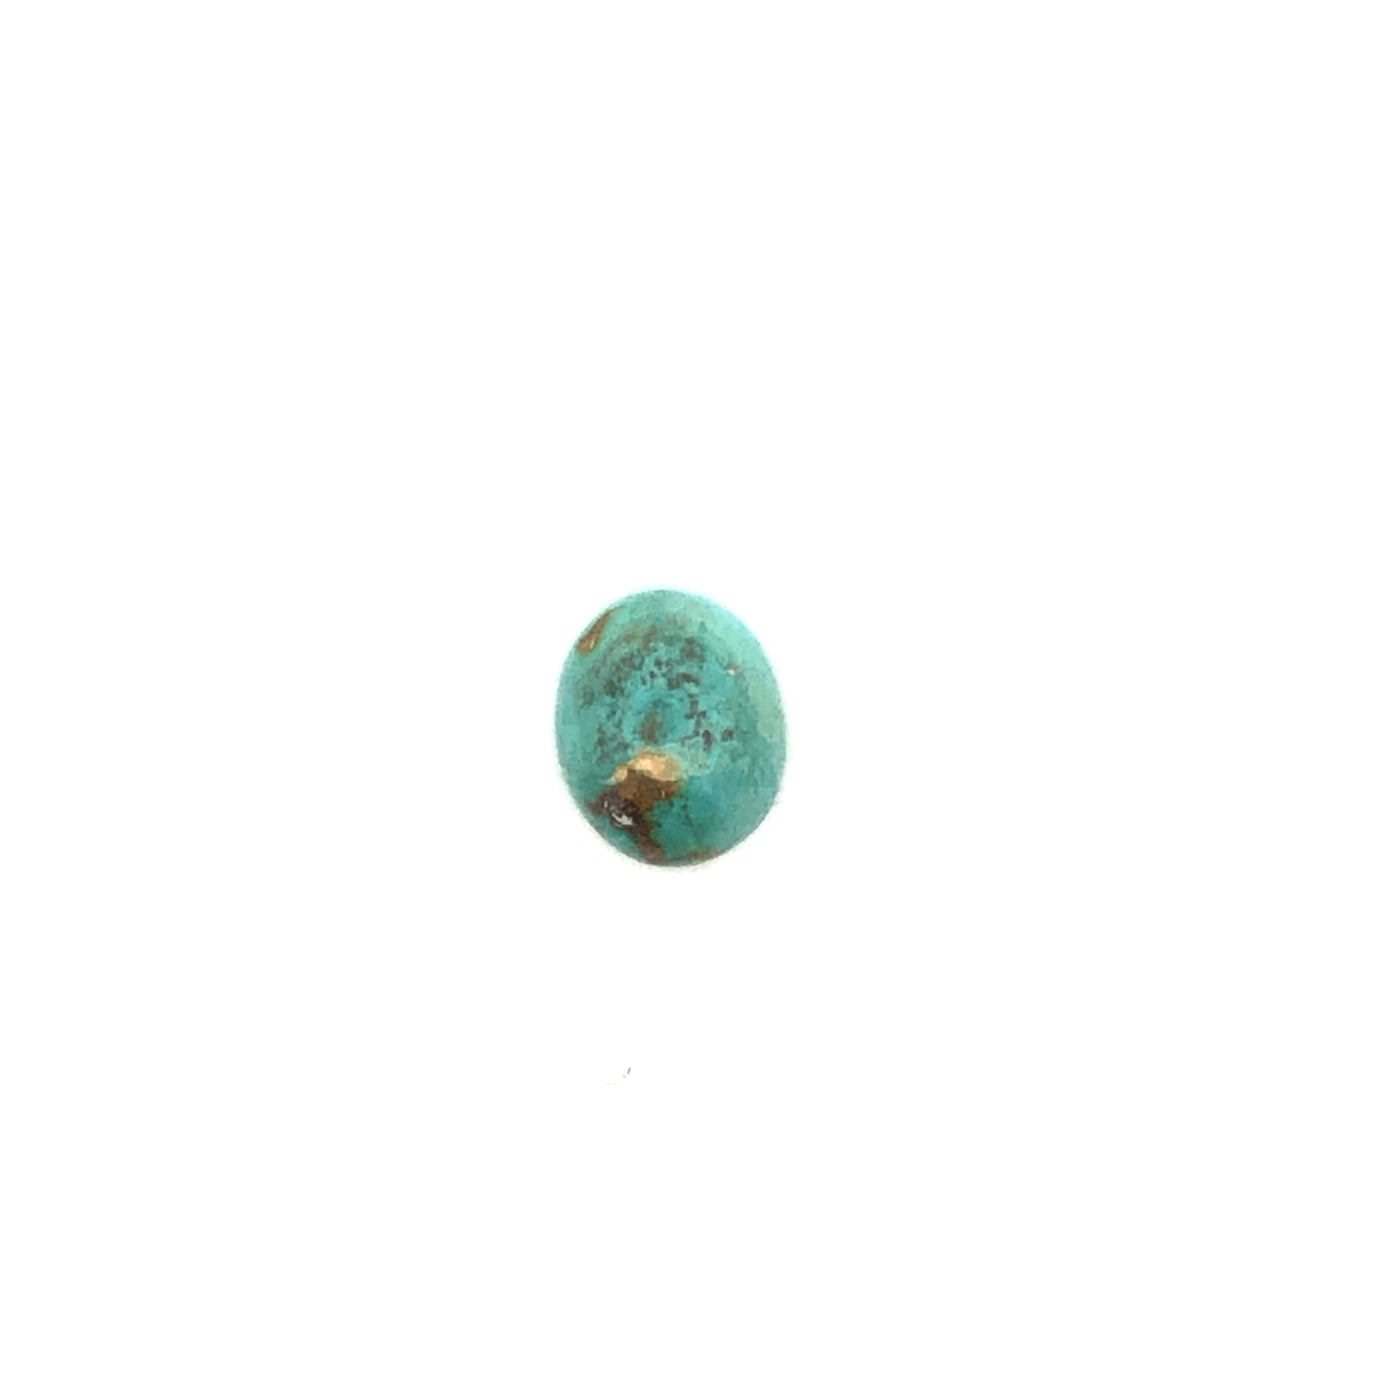 Loose Narooma Turquoise Oval Shaped 4.26Ct Blue With Brown